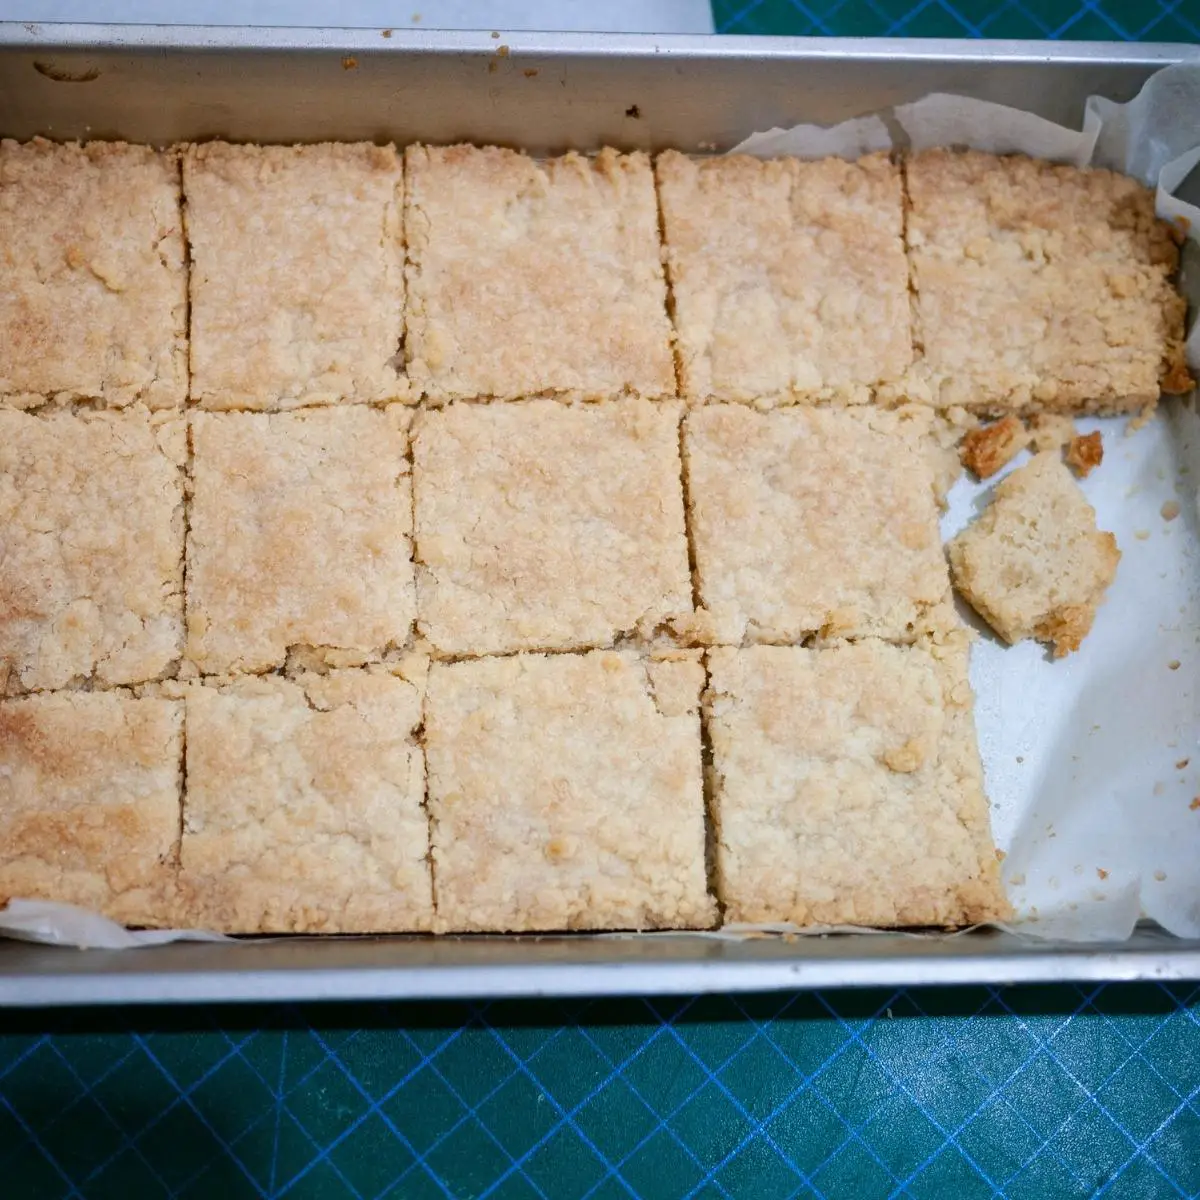 A baking tray with baked shortbread.